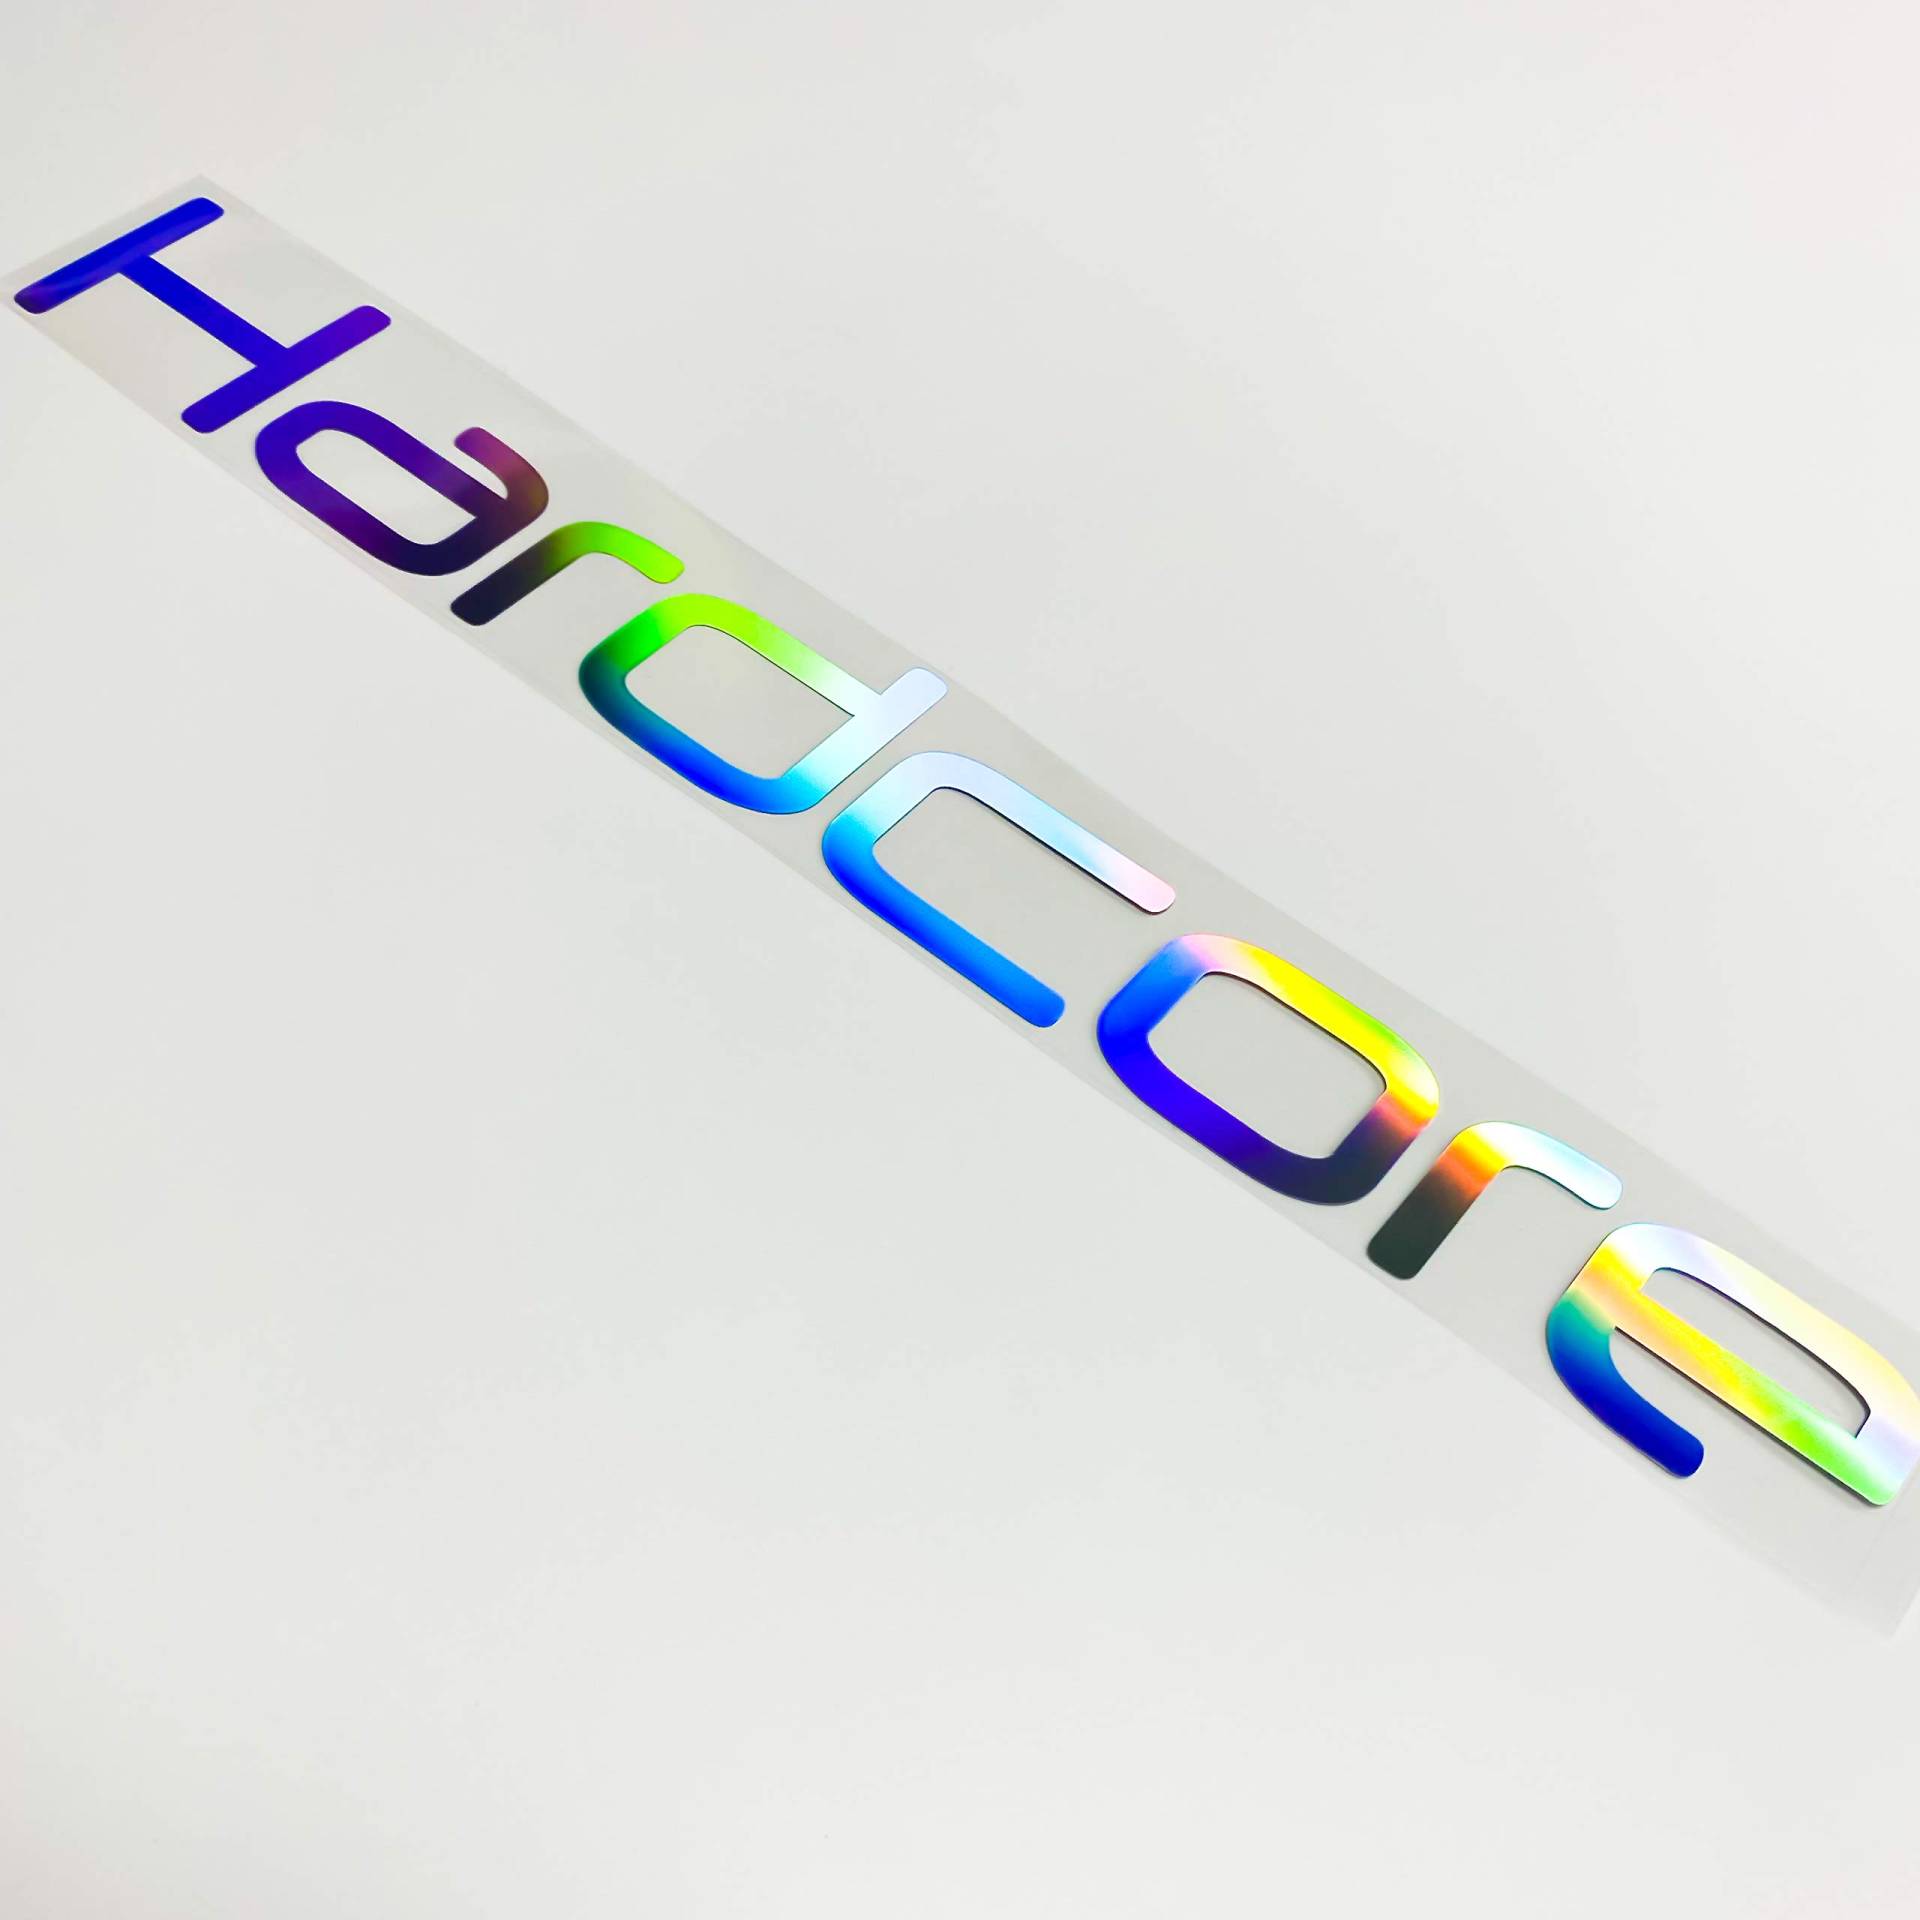 55cm Auto Aufkleber Hardcore Tuning Sticker New Hologramm Shiny Slick Oil Carstyle Dub Low Static Lifestyle Limited Edition Performance von 1A Style Sticker